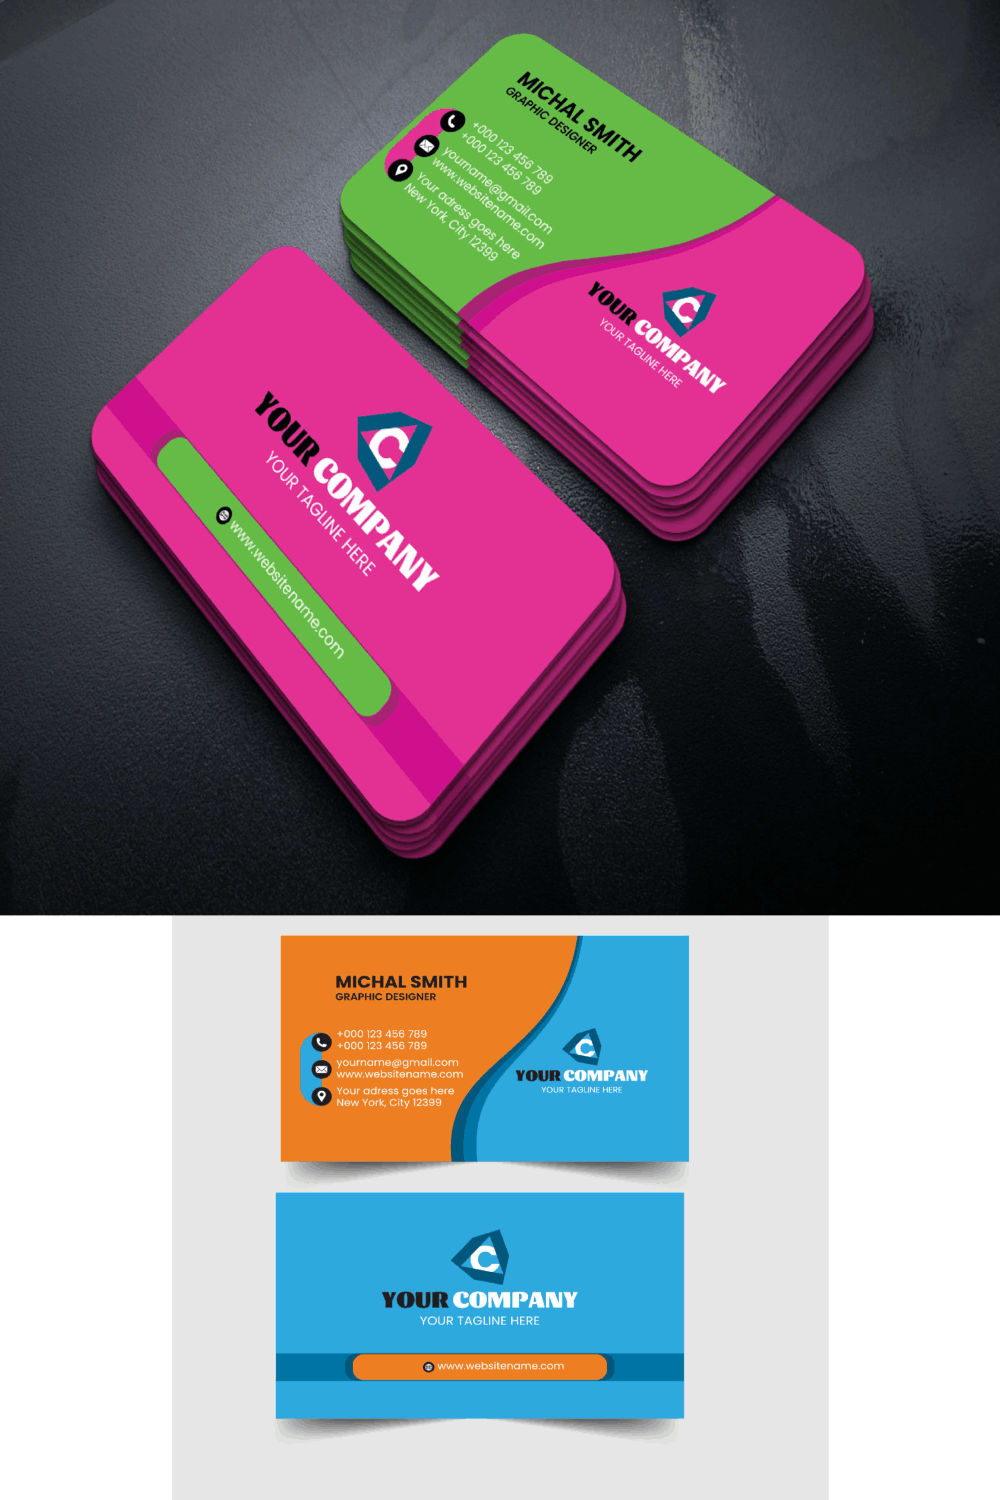 Business Card Design 4 Color variant included pinterest preview image.